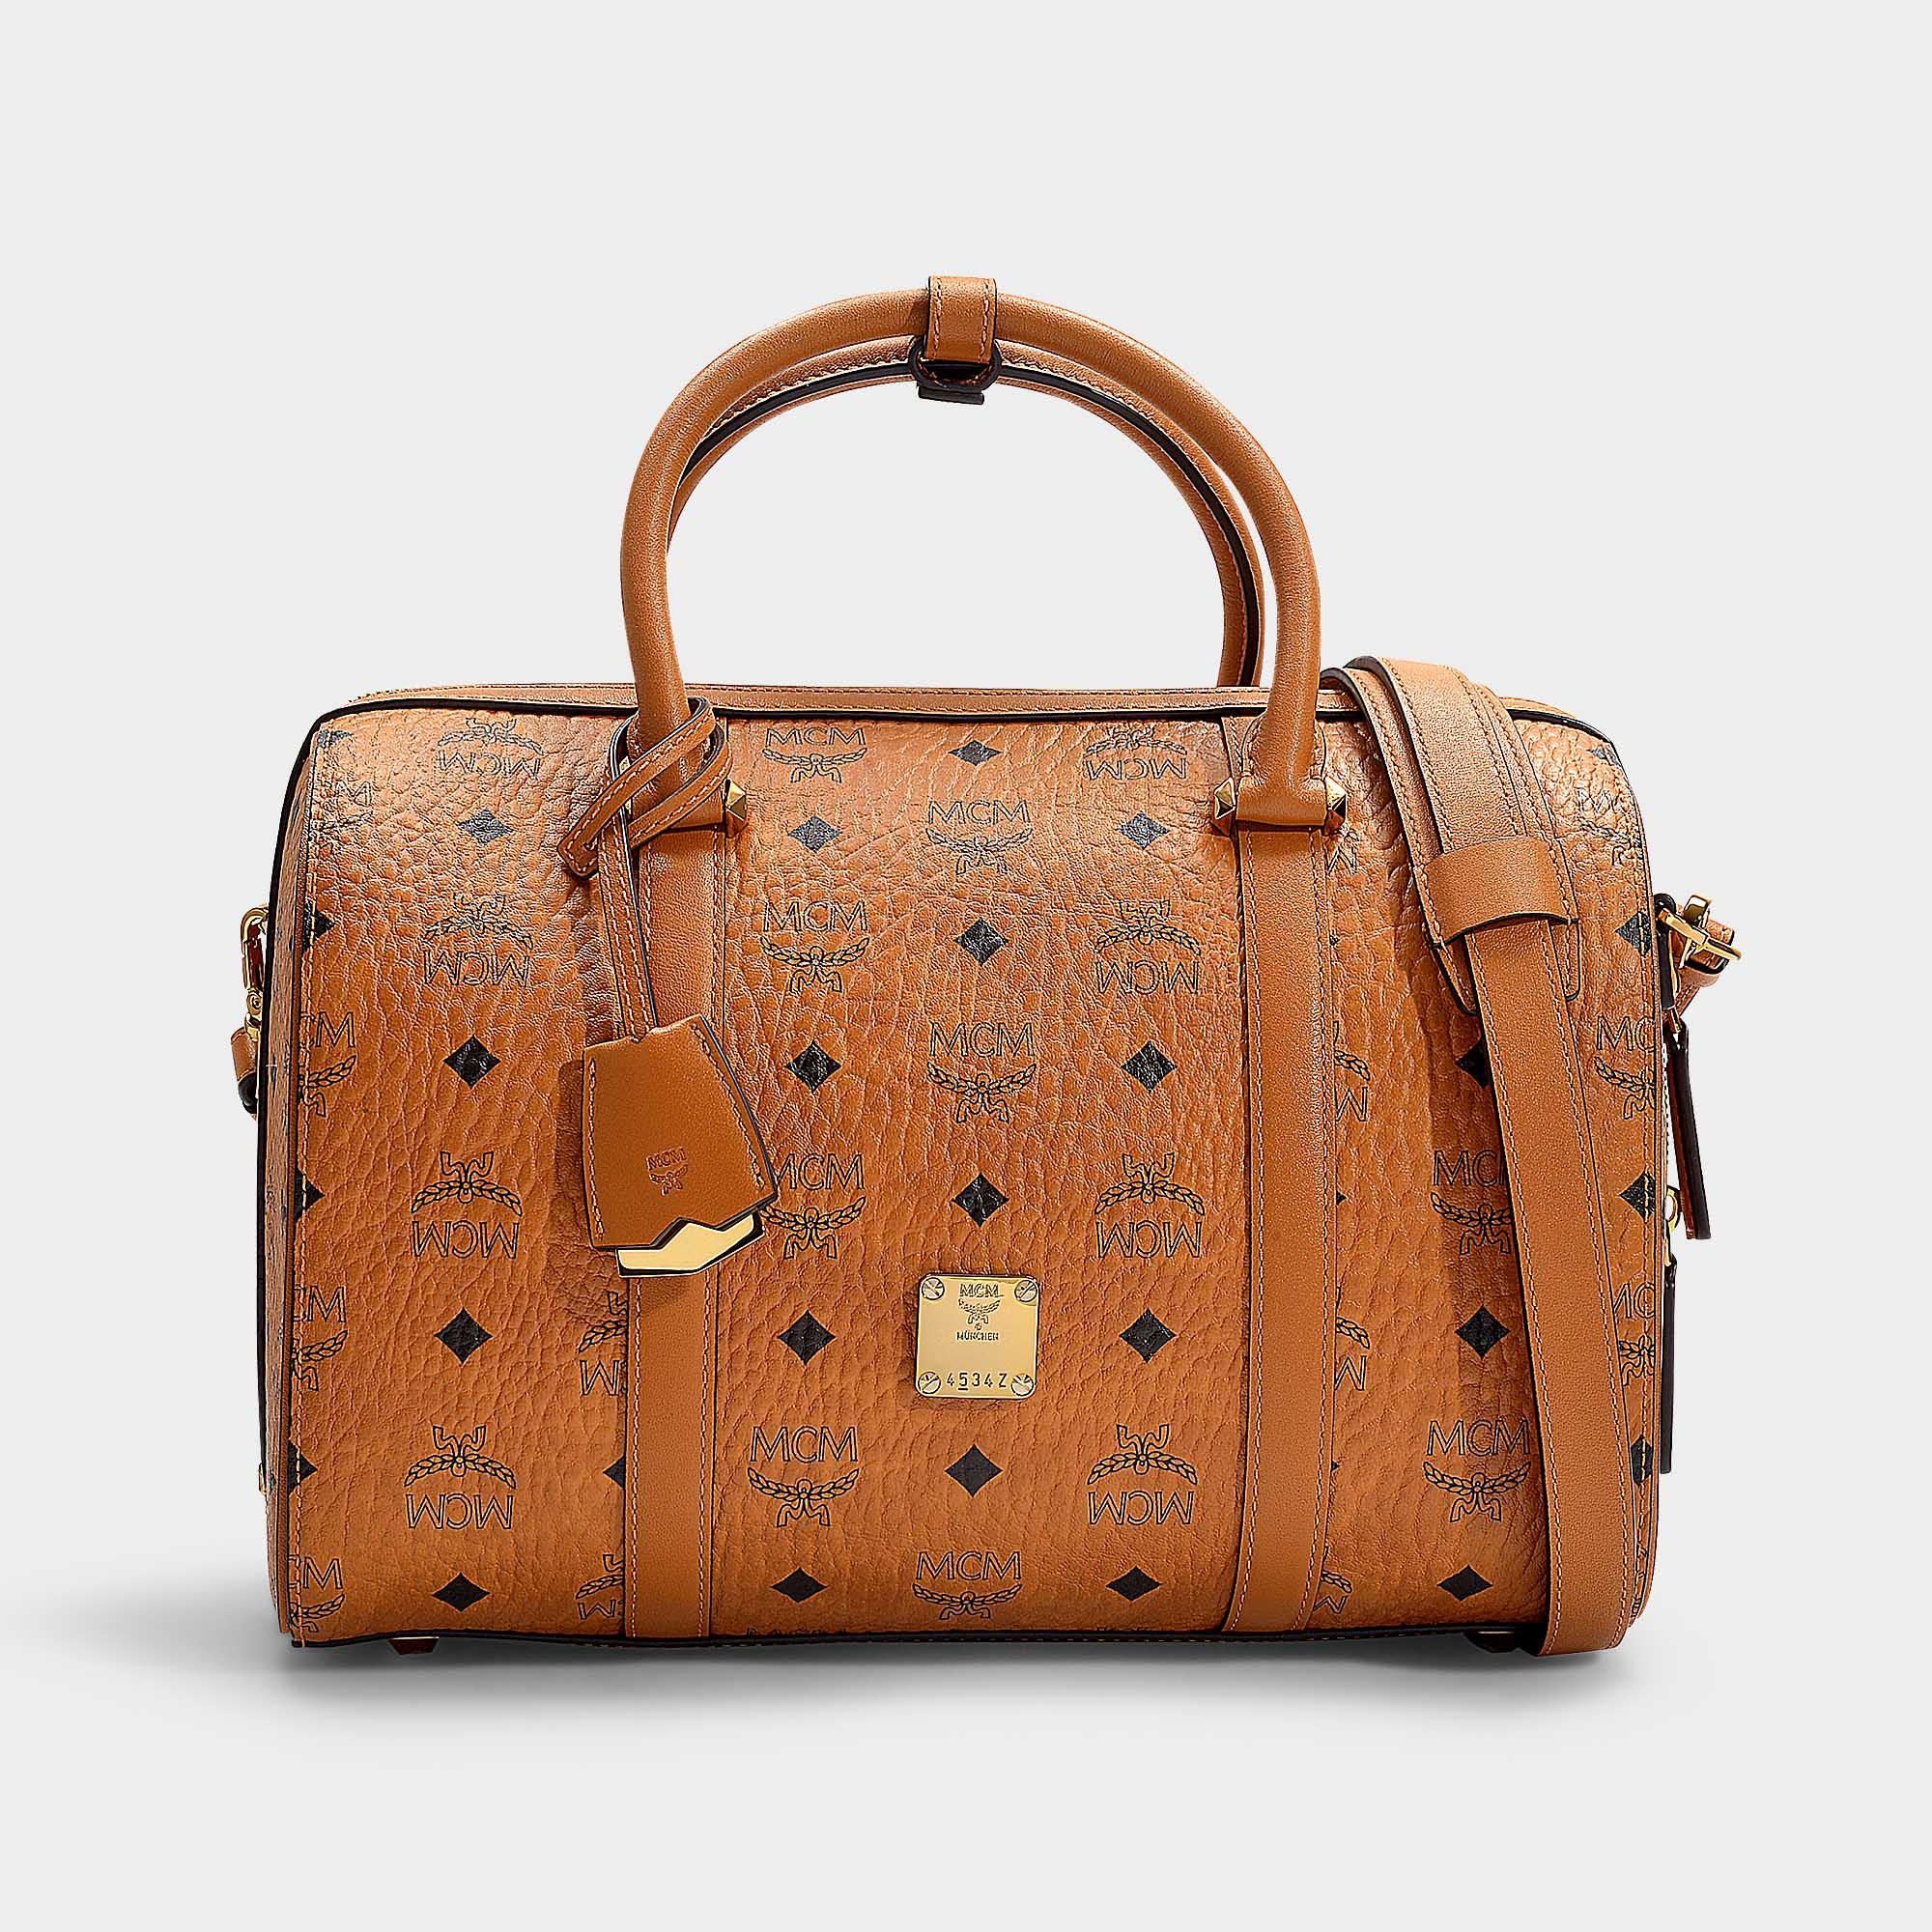 MCM, Bags, Mcm Small Boston Bag In Congnac Visetos Coated Canvas Leather